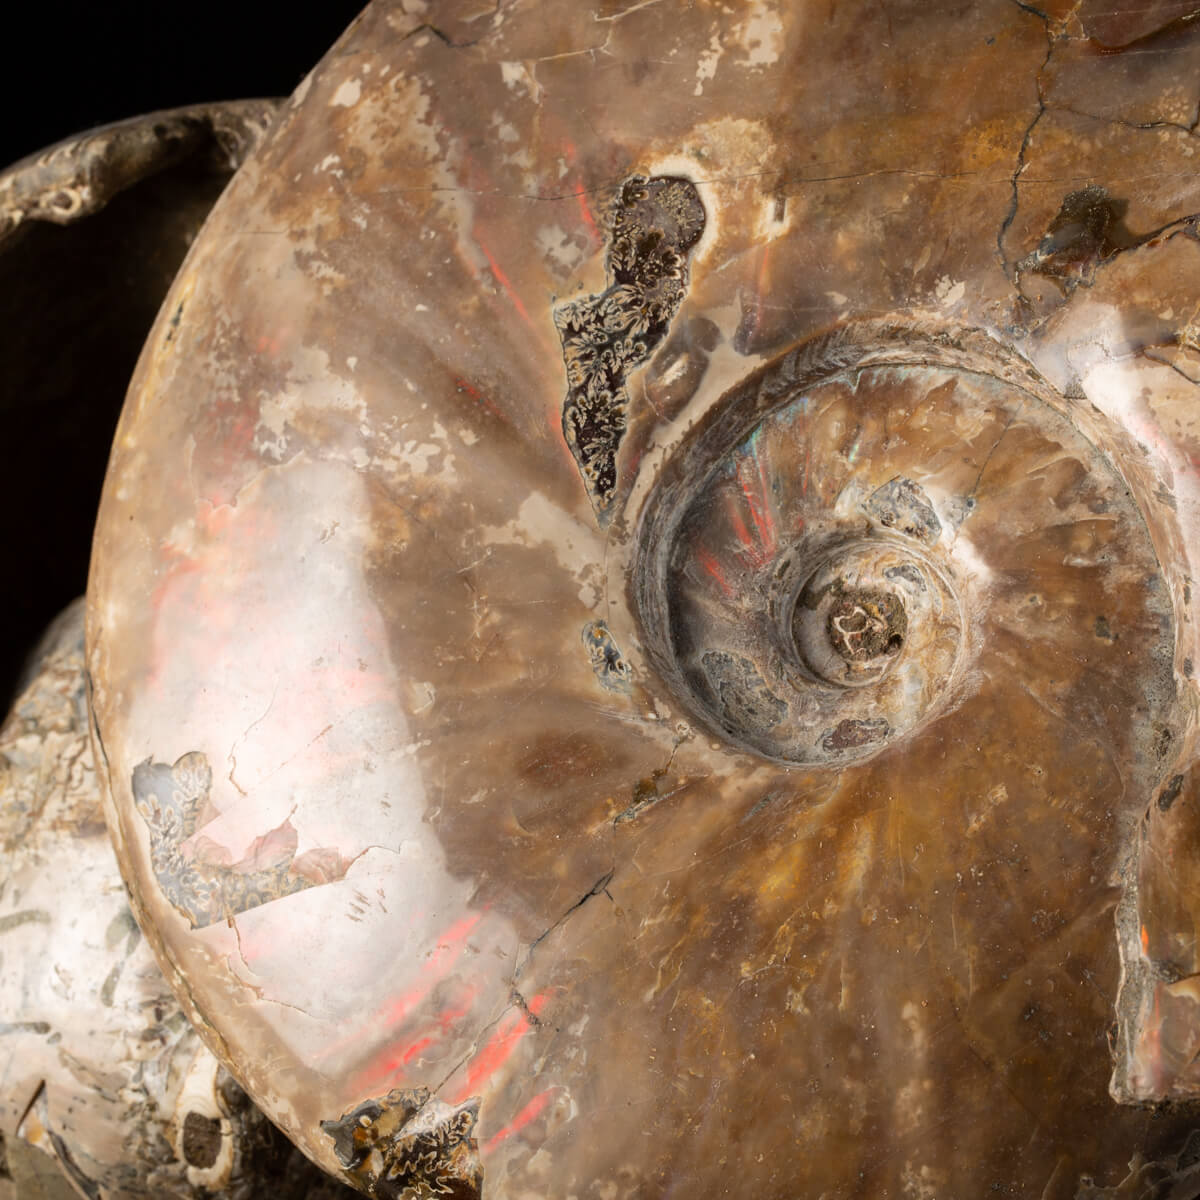 Cleoniceras and Douvilleiceras Ammonites Group